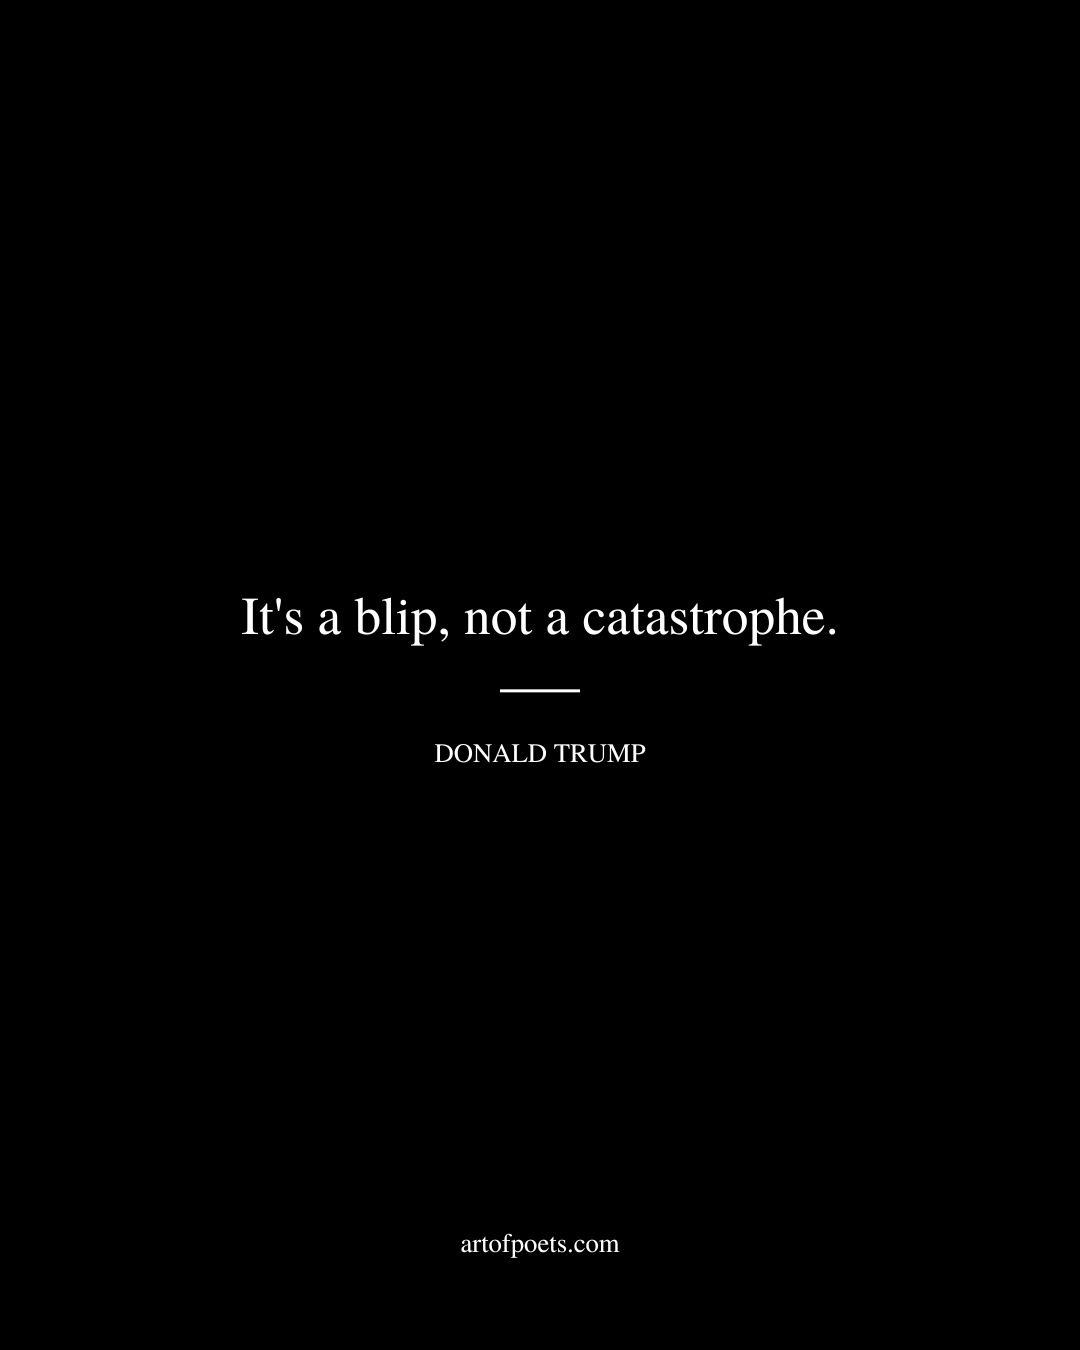 Its a blip not a catastrophe